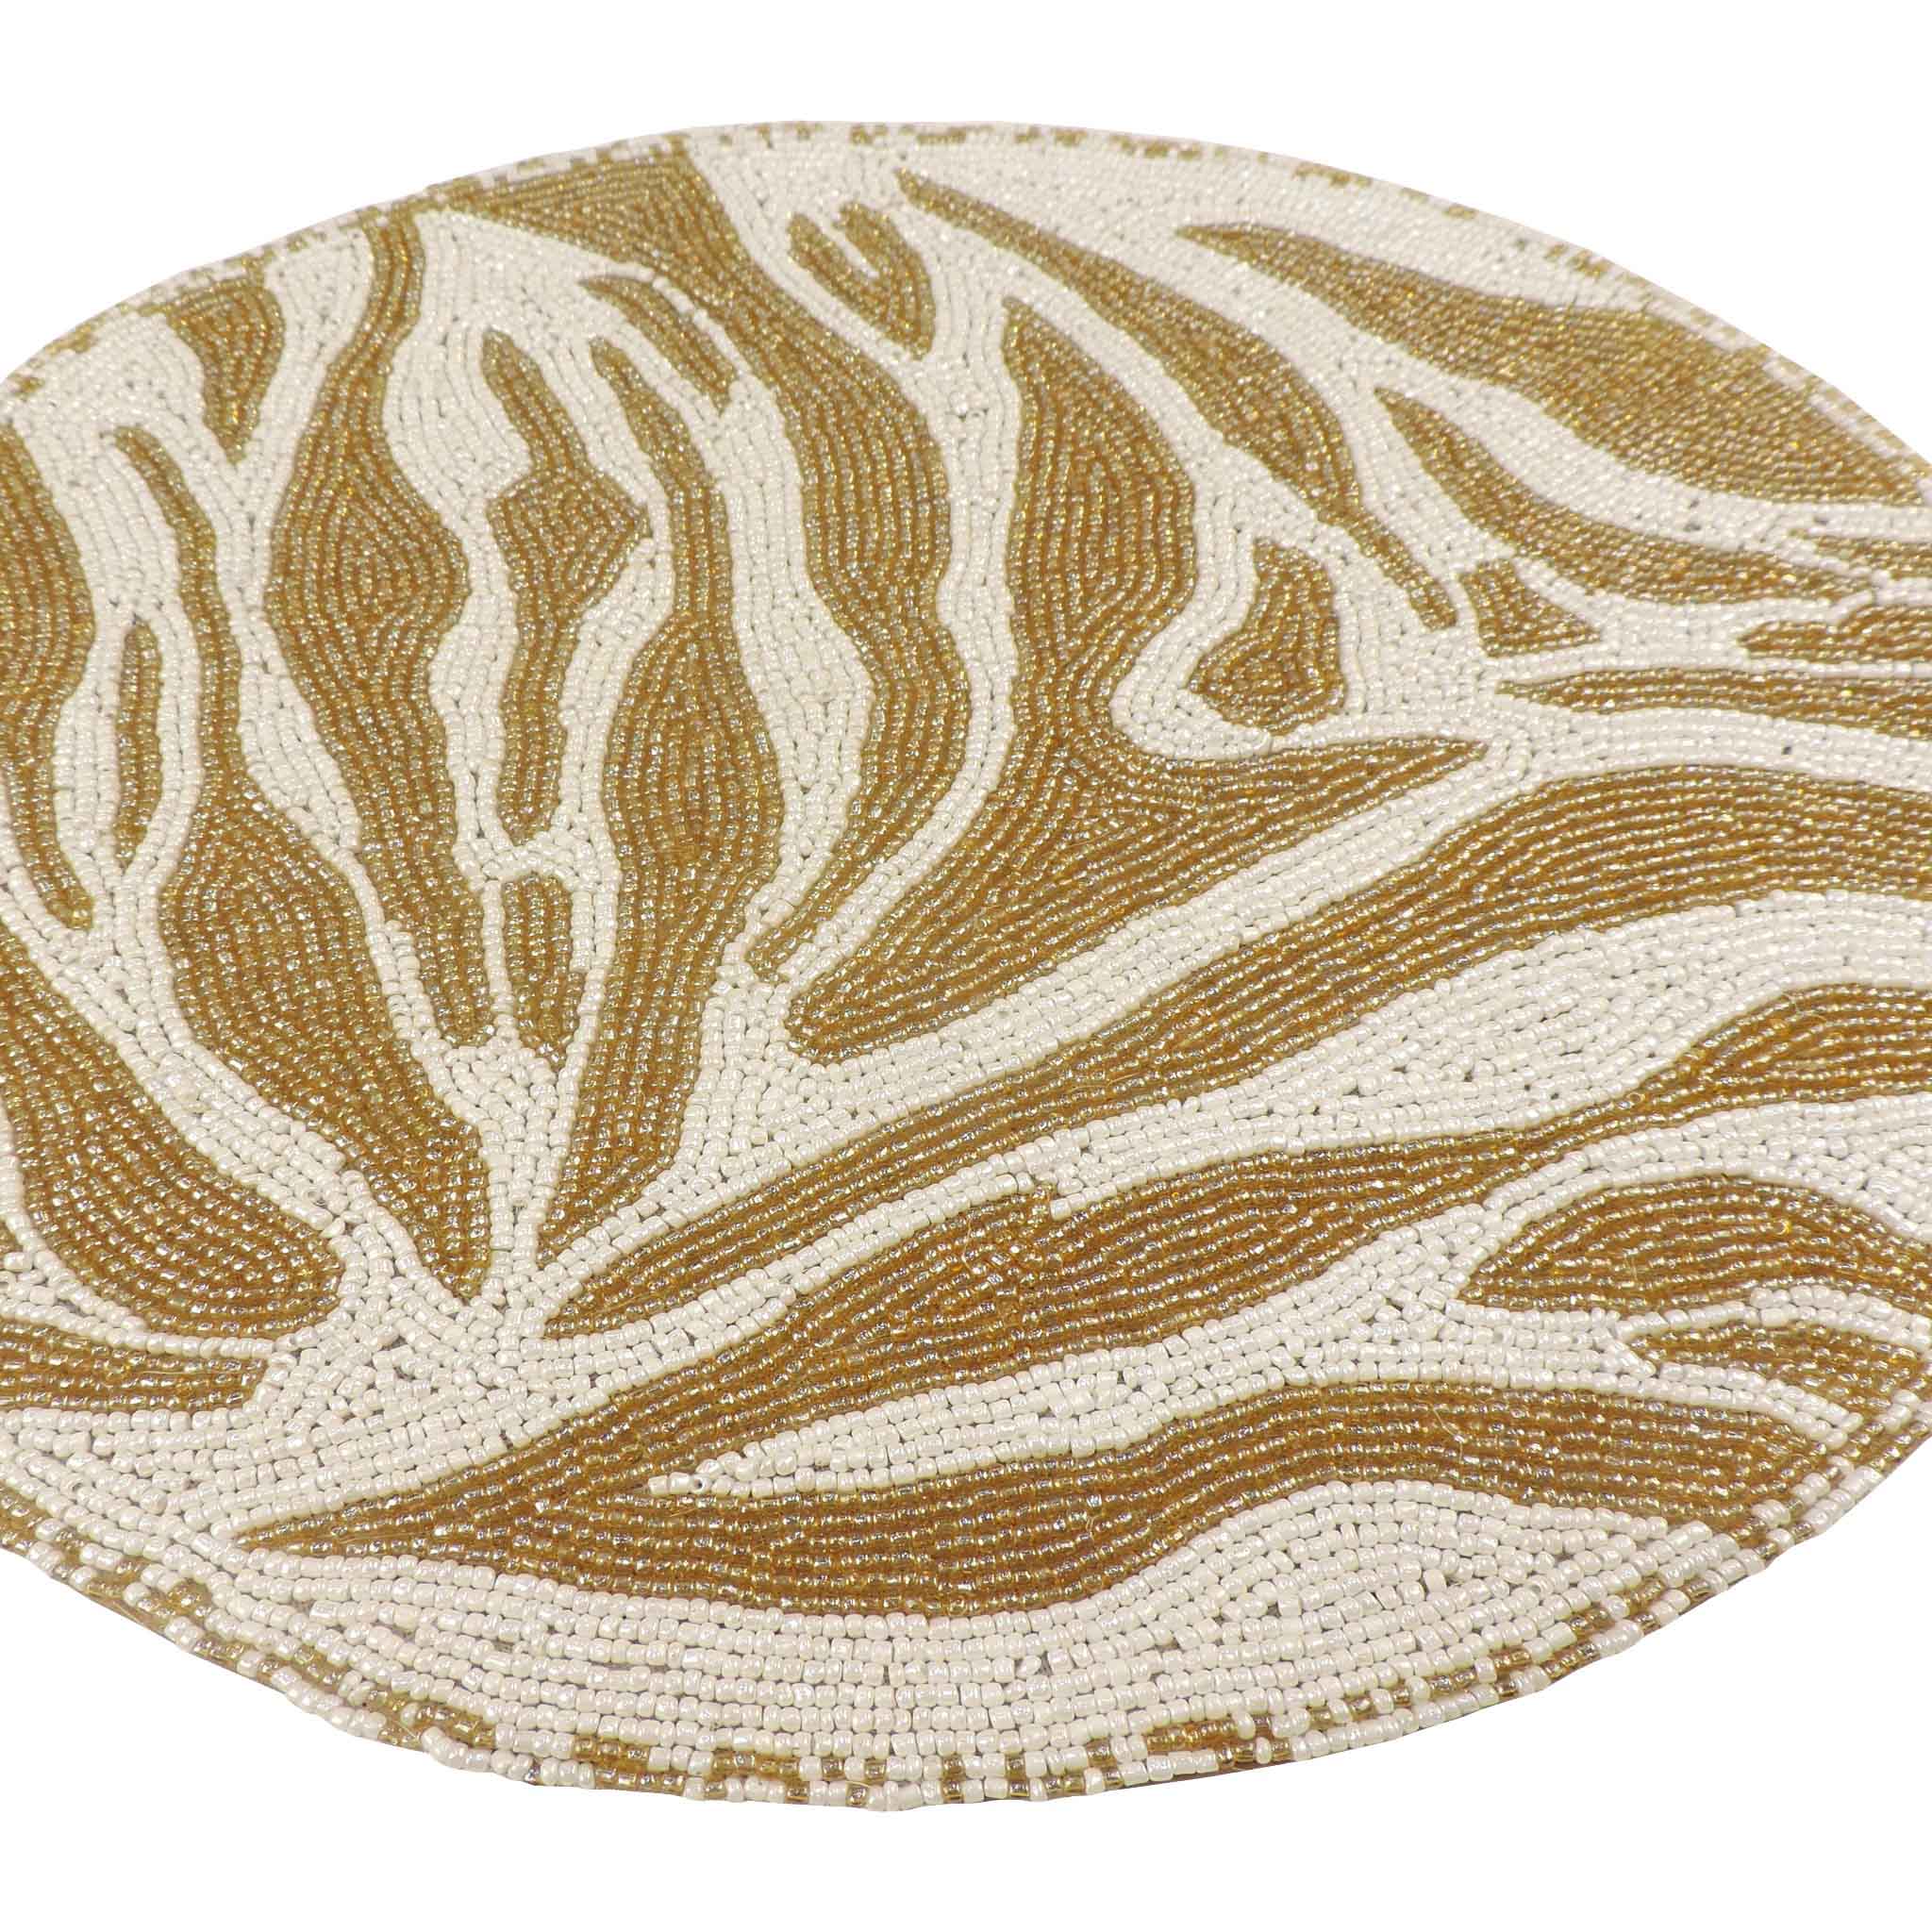 Modern Camo Glass Bead Embroidered Placemat in Cream Gold, Set of 2/4